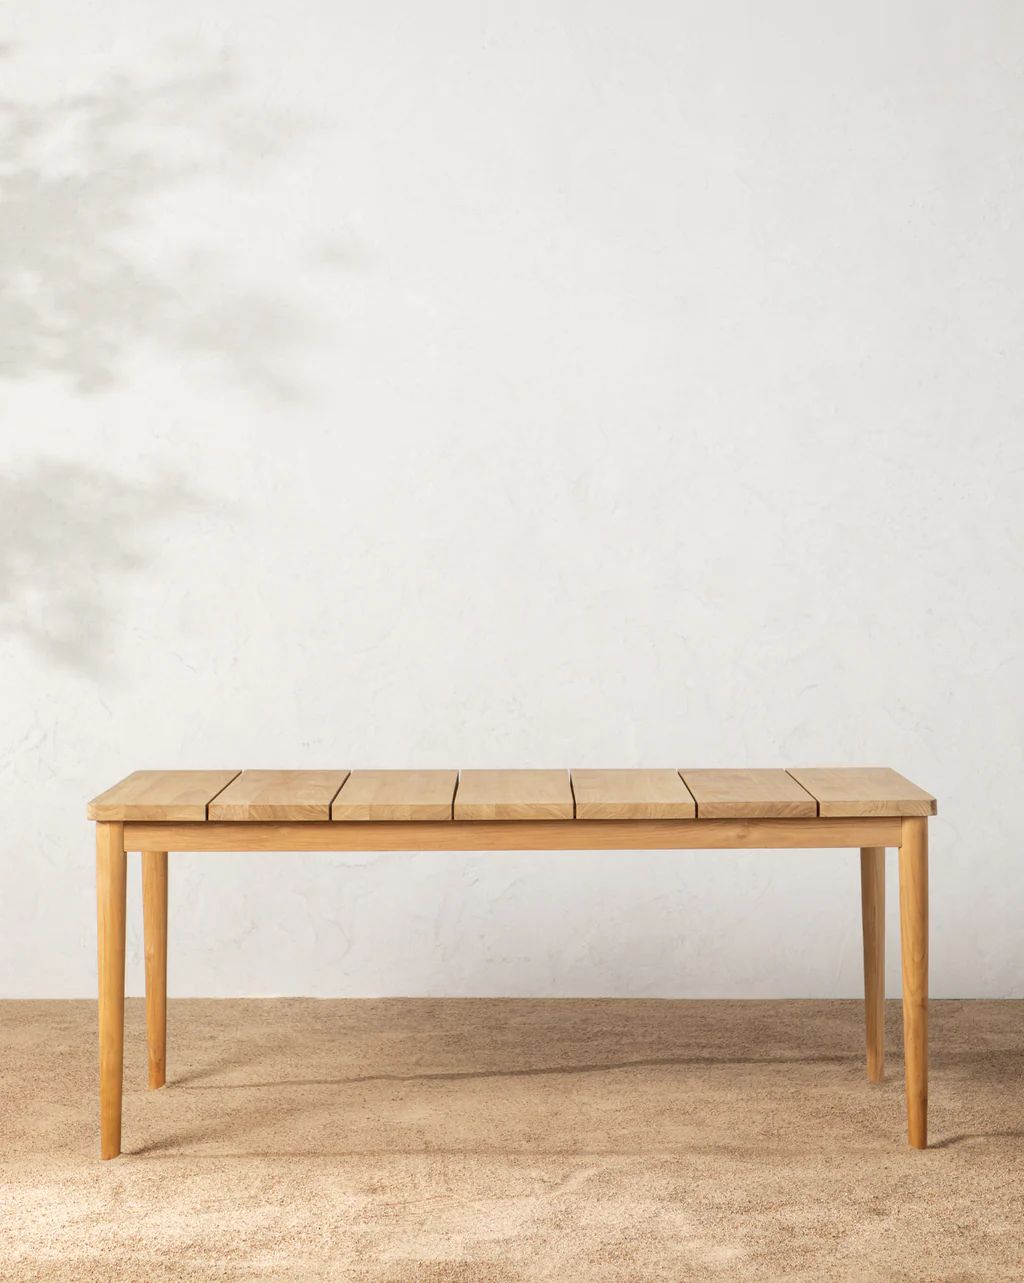 Elowyn Outdoor Dining Table | McGee & Co.